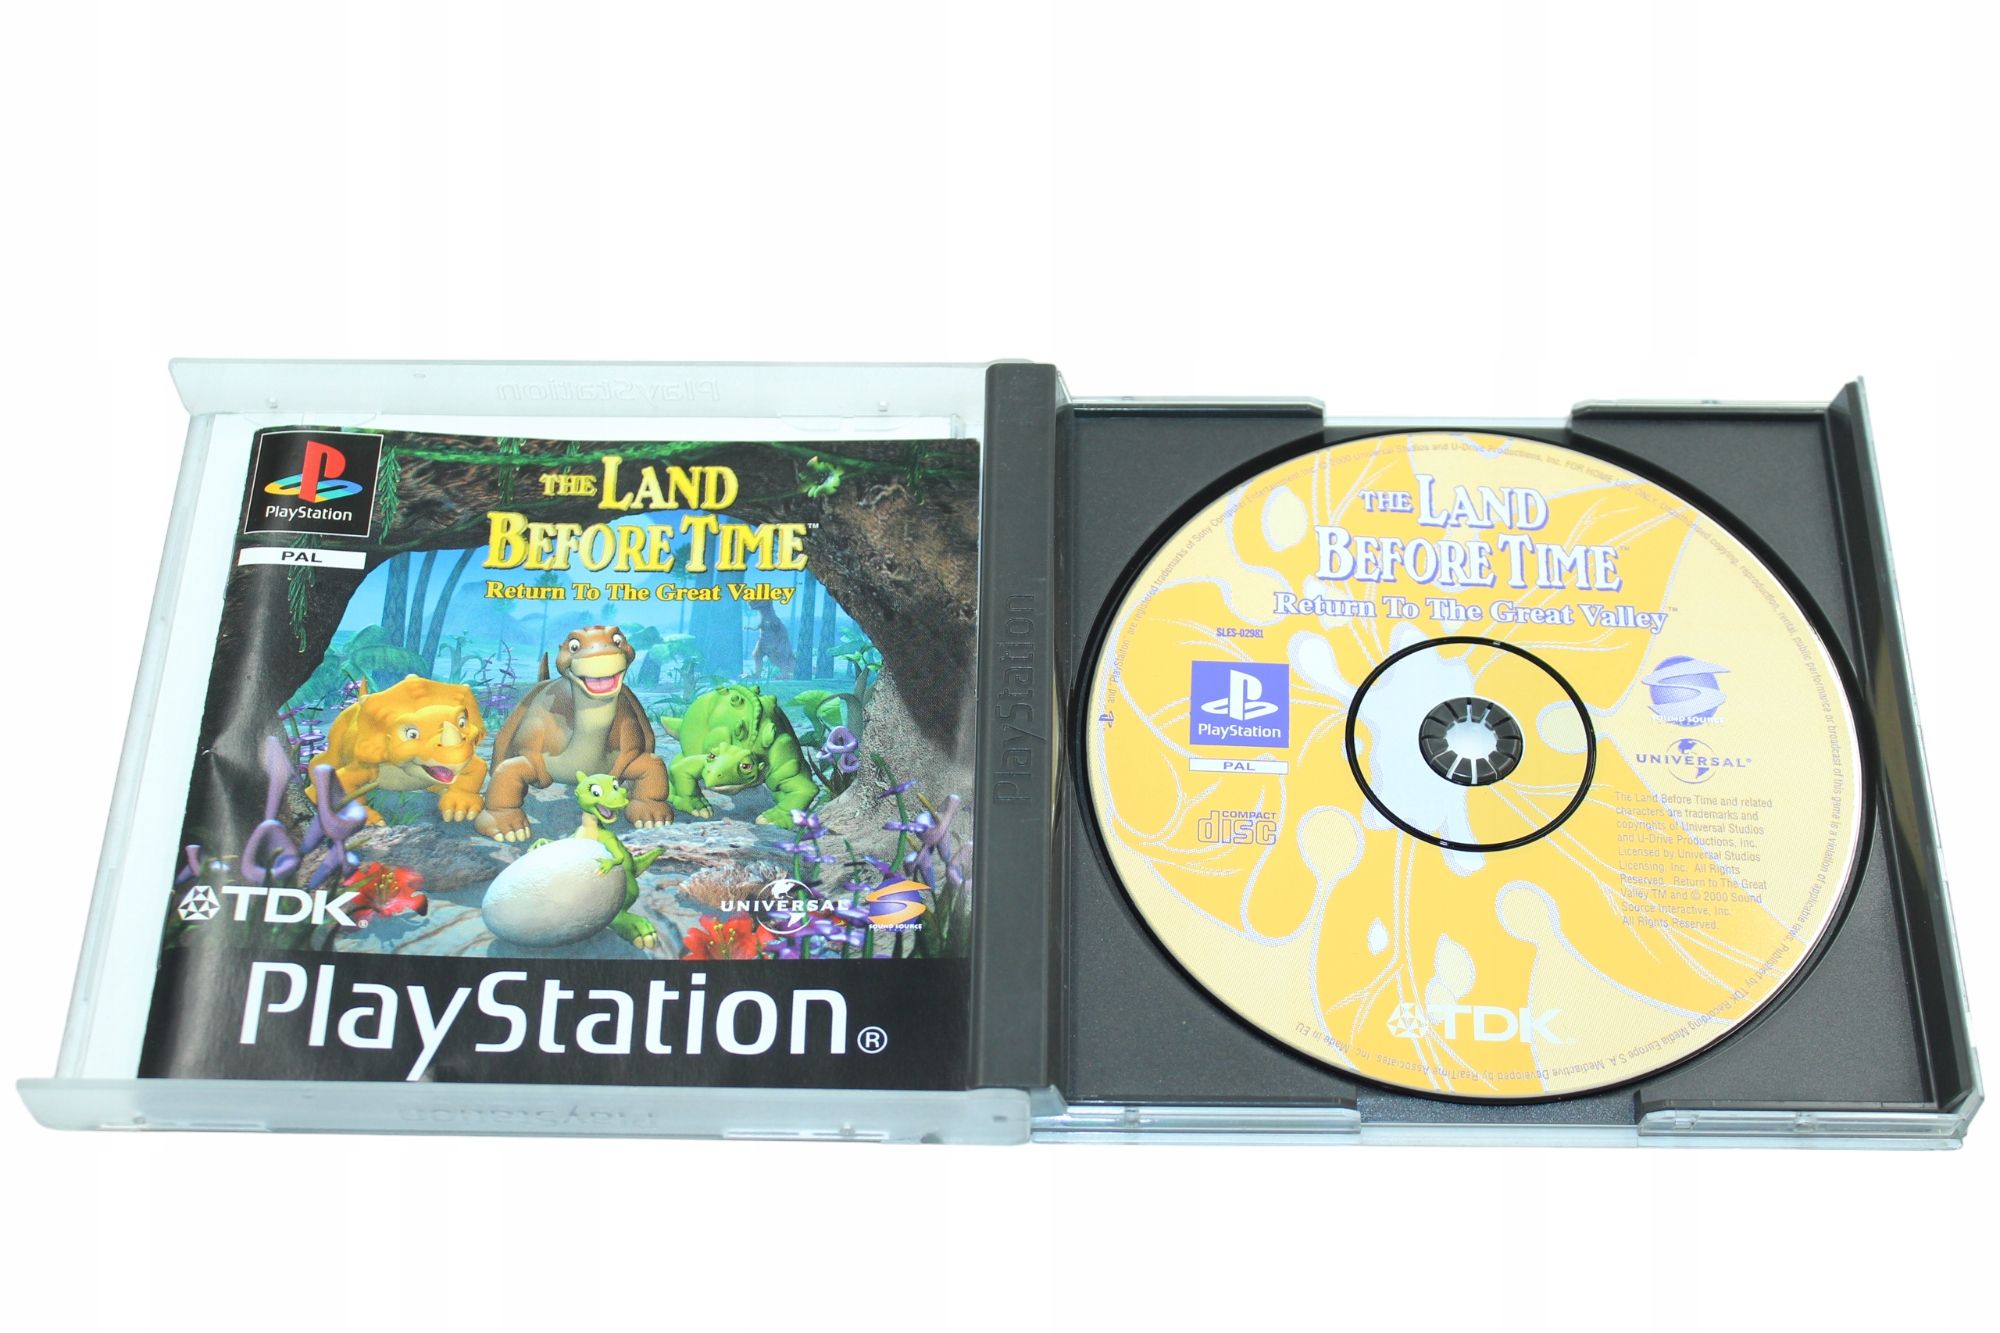 The Land Before Time Return To The Great Valley PS1 PSX PlayStation 1